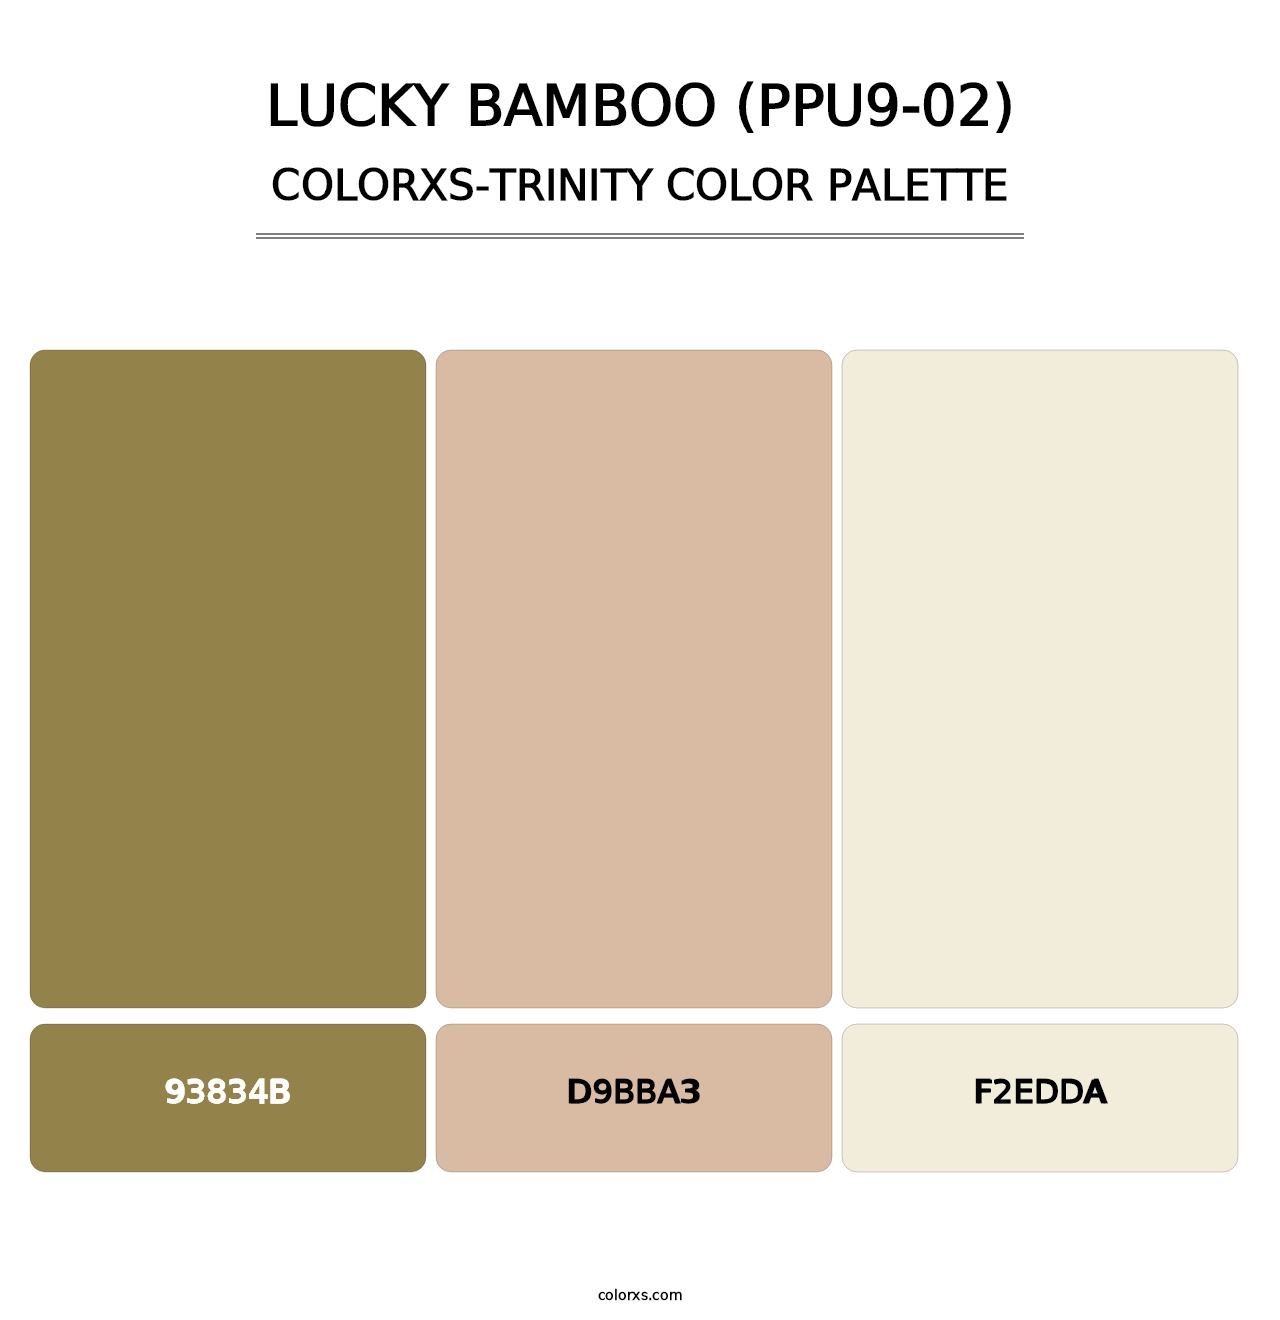 Lucky Bamboo (PPU9-02) - Colorxs Trinity Palette